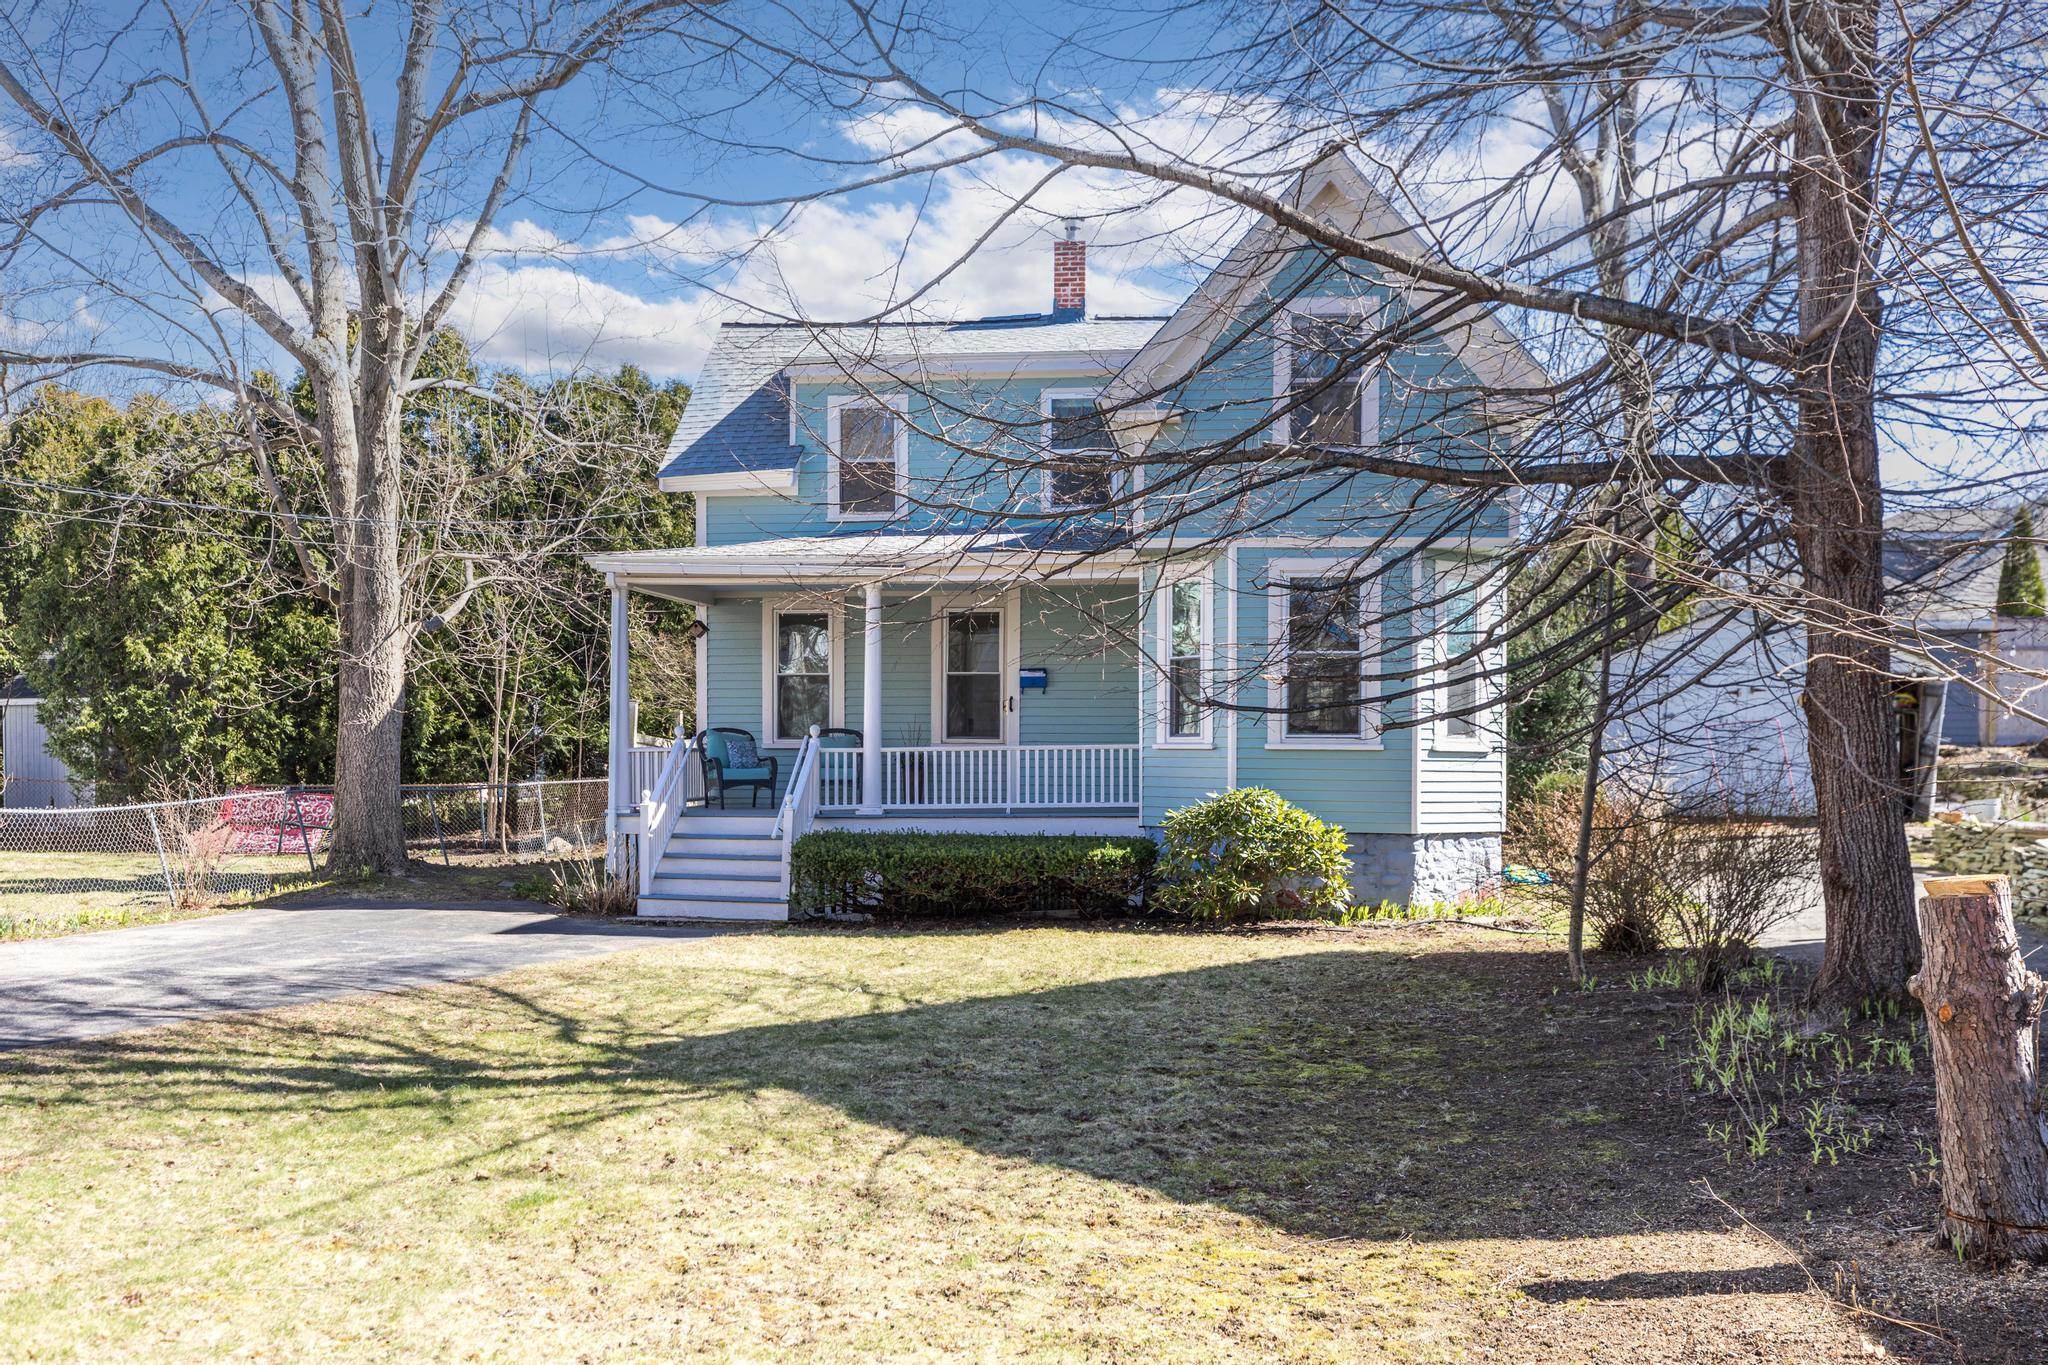 42 Orchard Street, Portsmouth, NH 